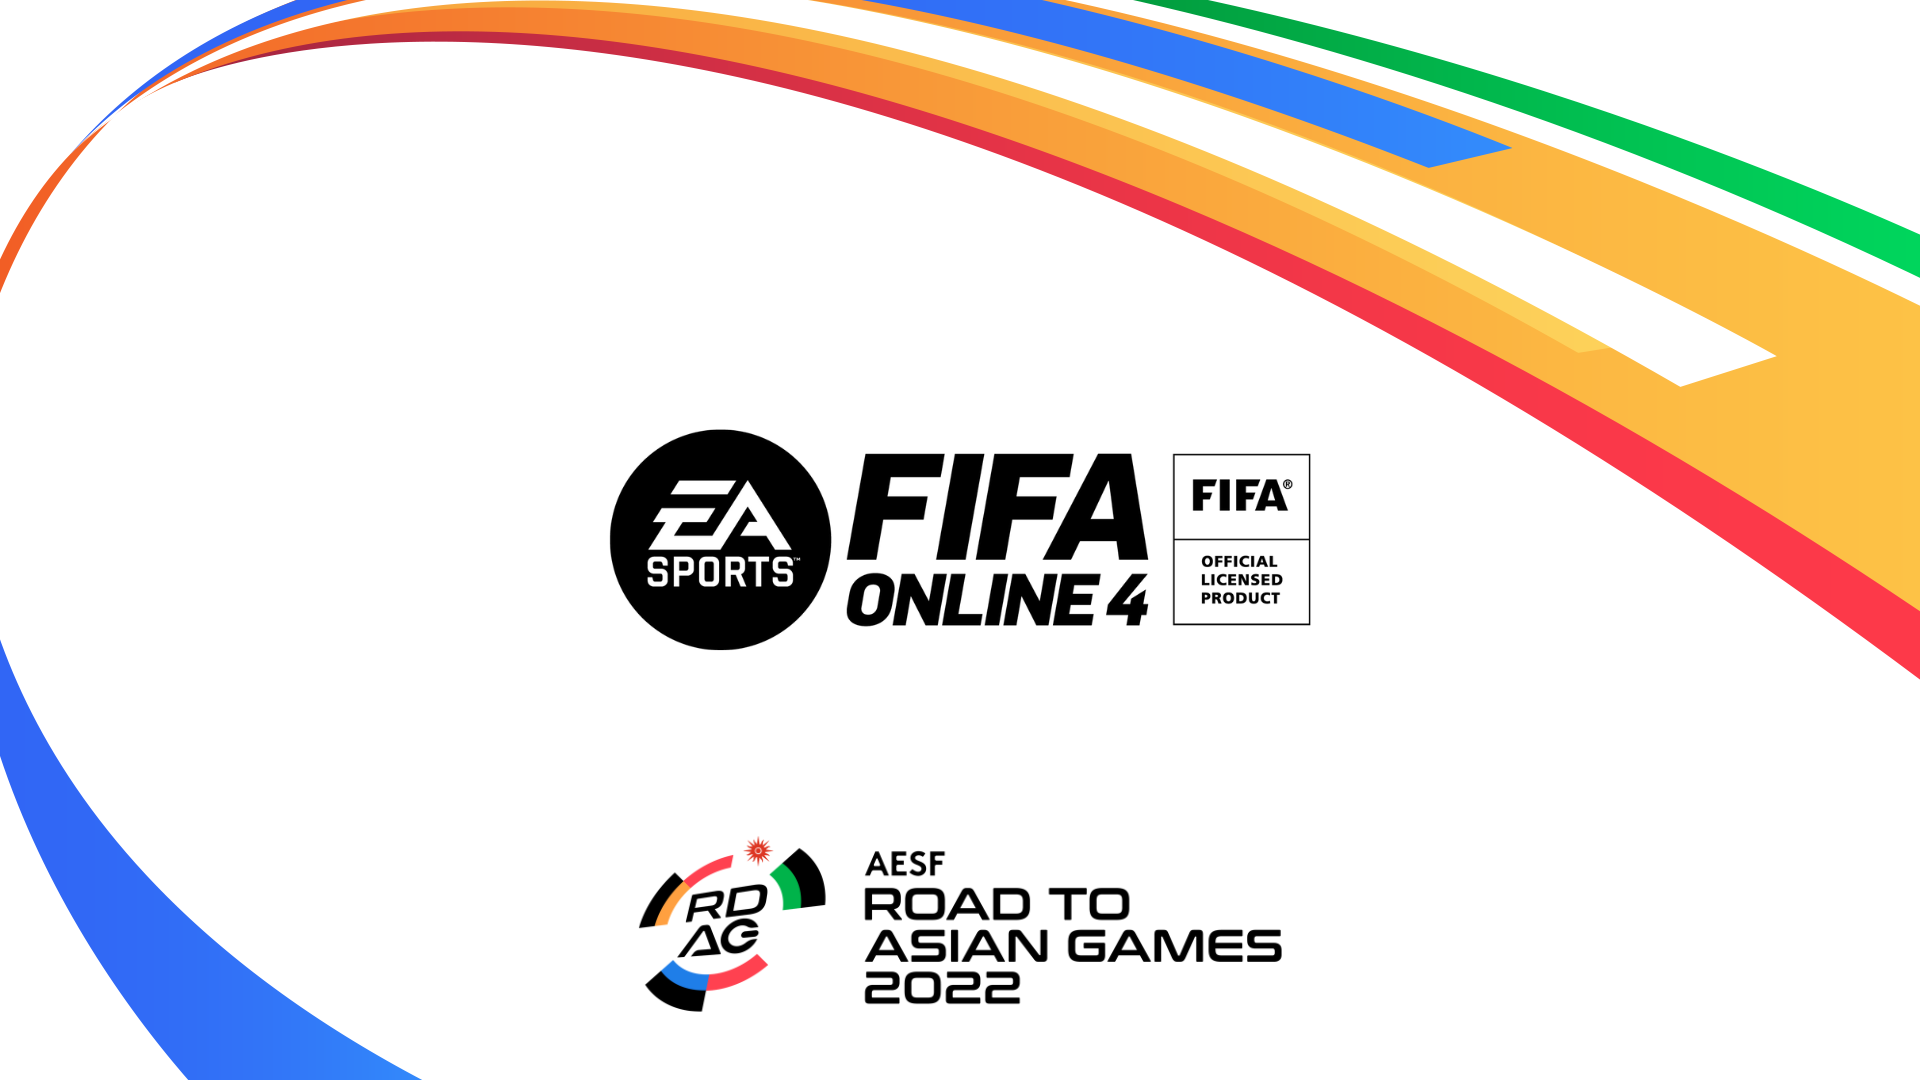 RDAG 2022 FIFA Online 4 – A Chance to Score